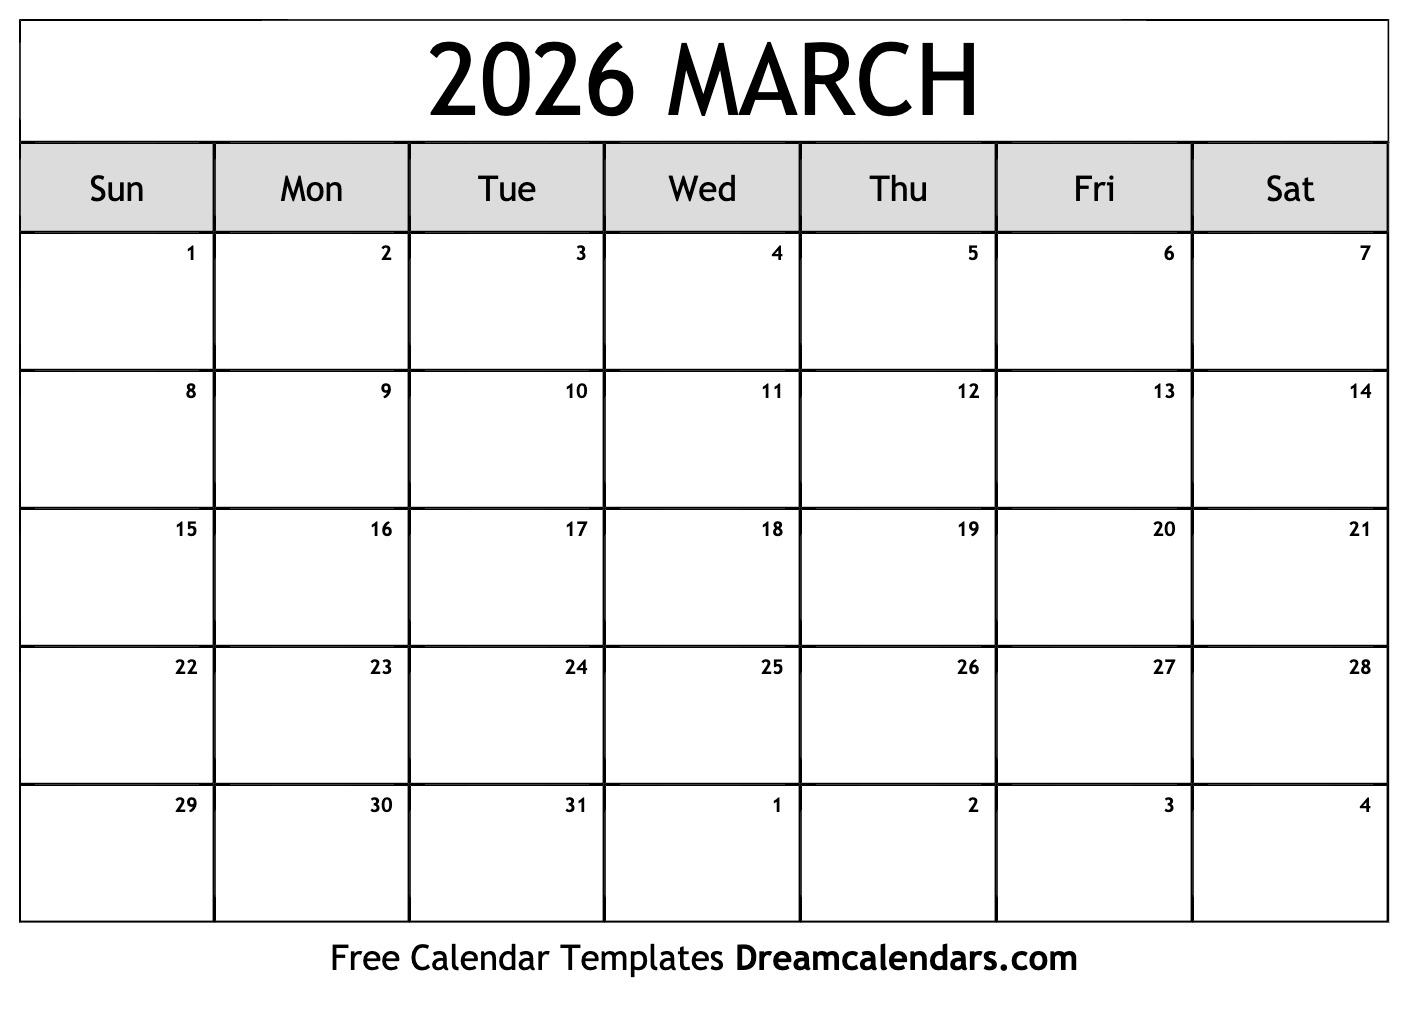 march-2026-calendar-free-blank-printable-with-holidays